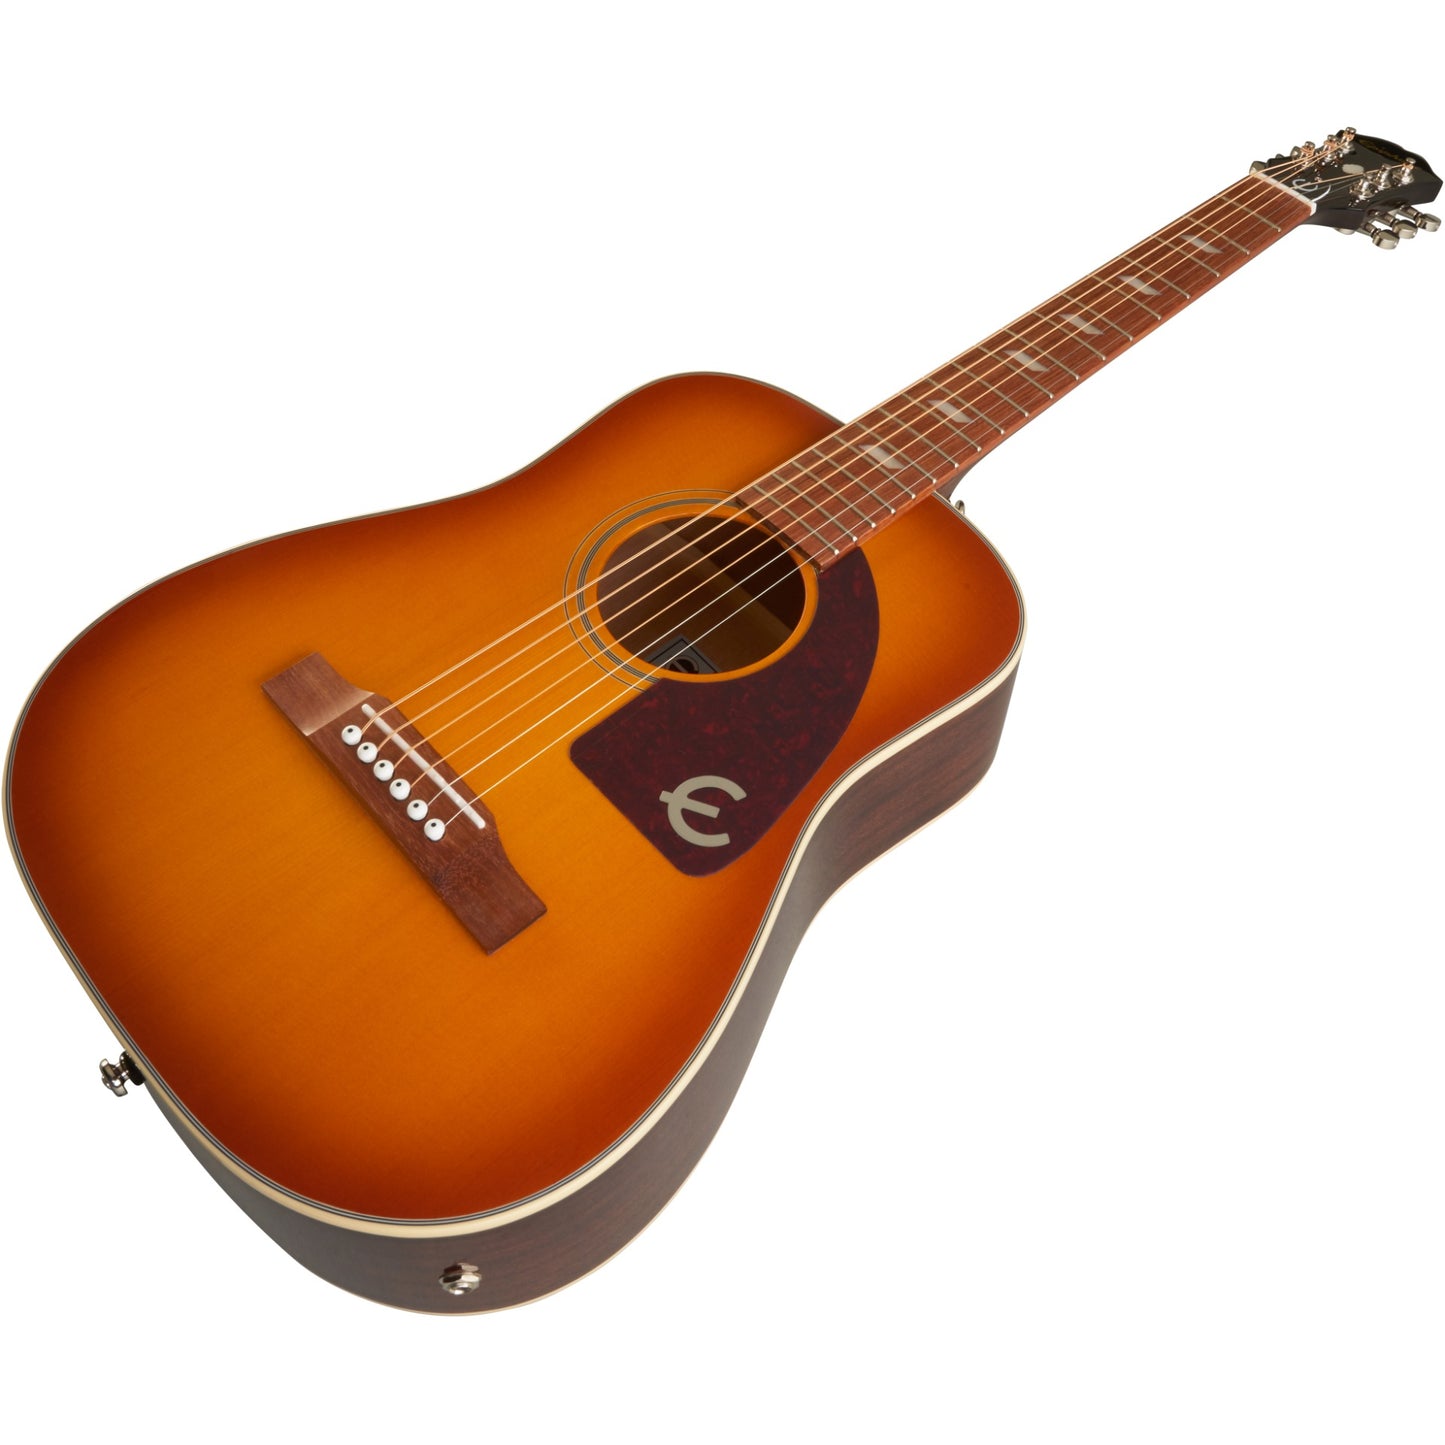 Epiphone Lil’ Text Travel Acoustic Electric Guitar in Faded Cherry